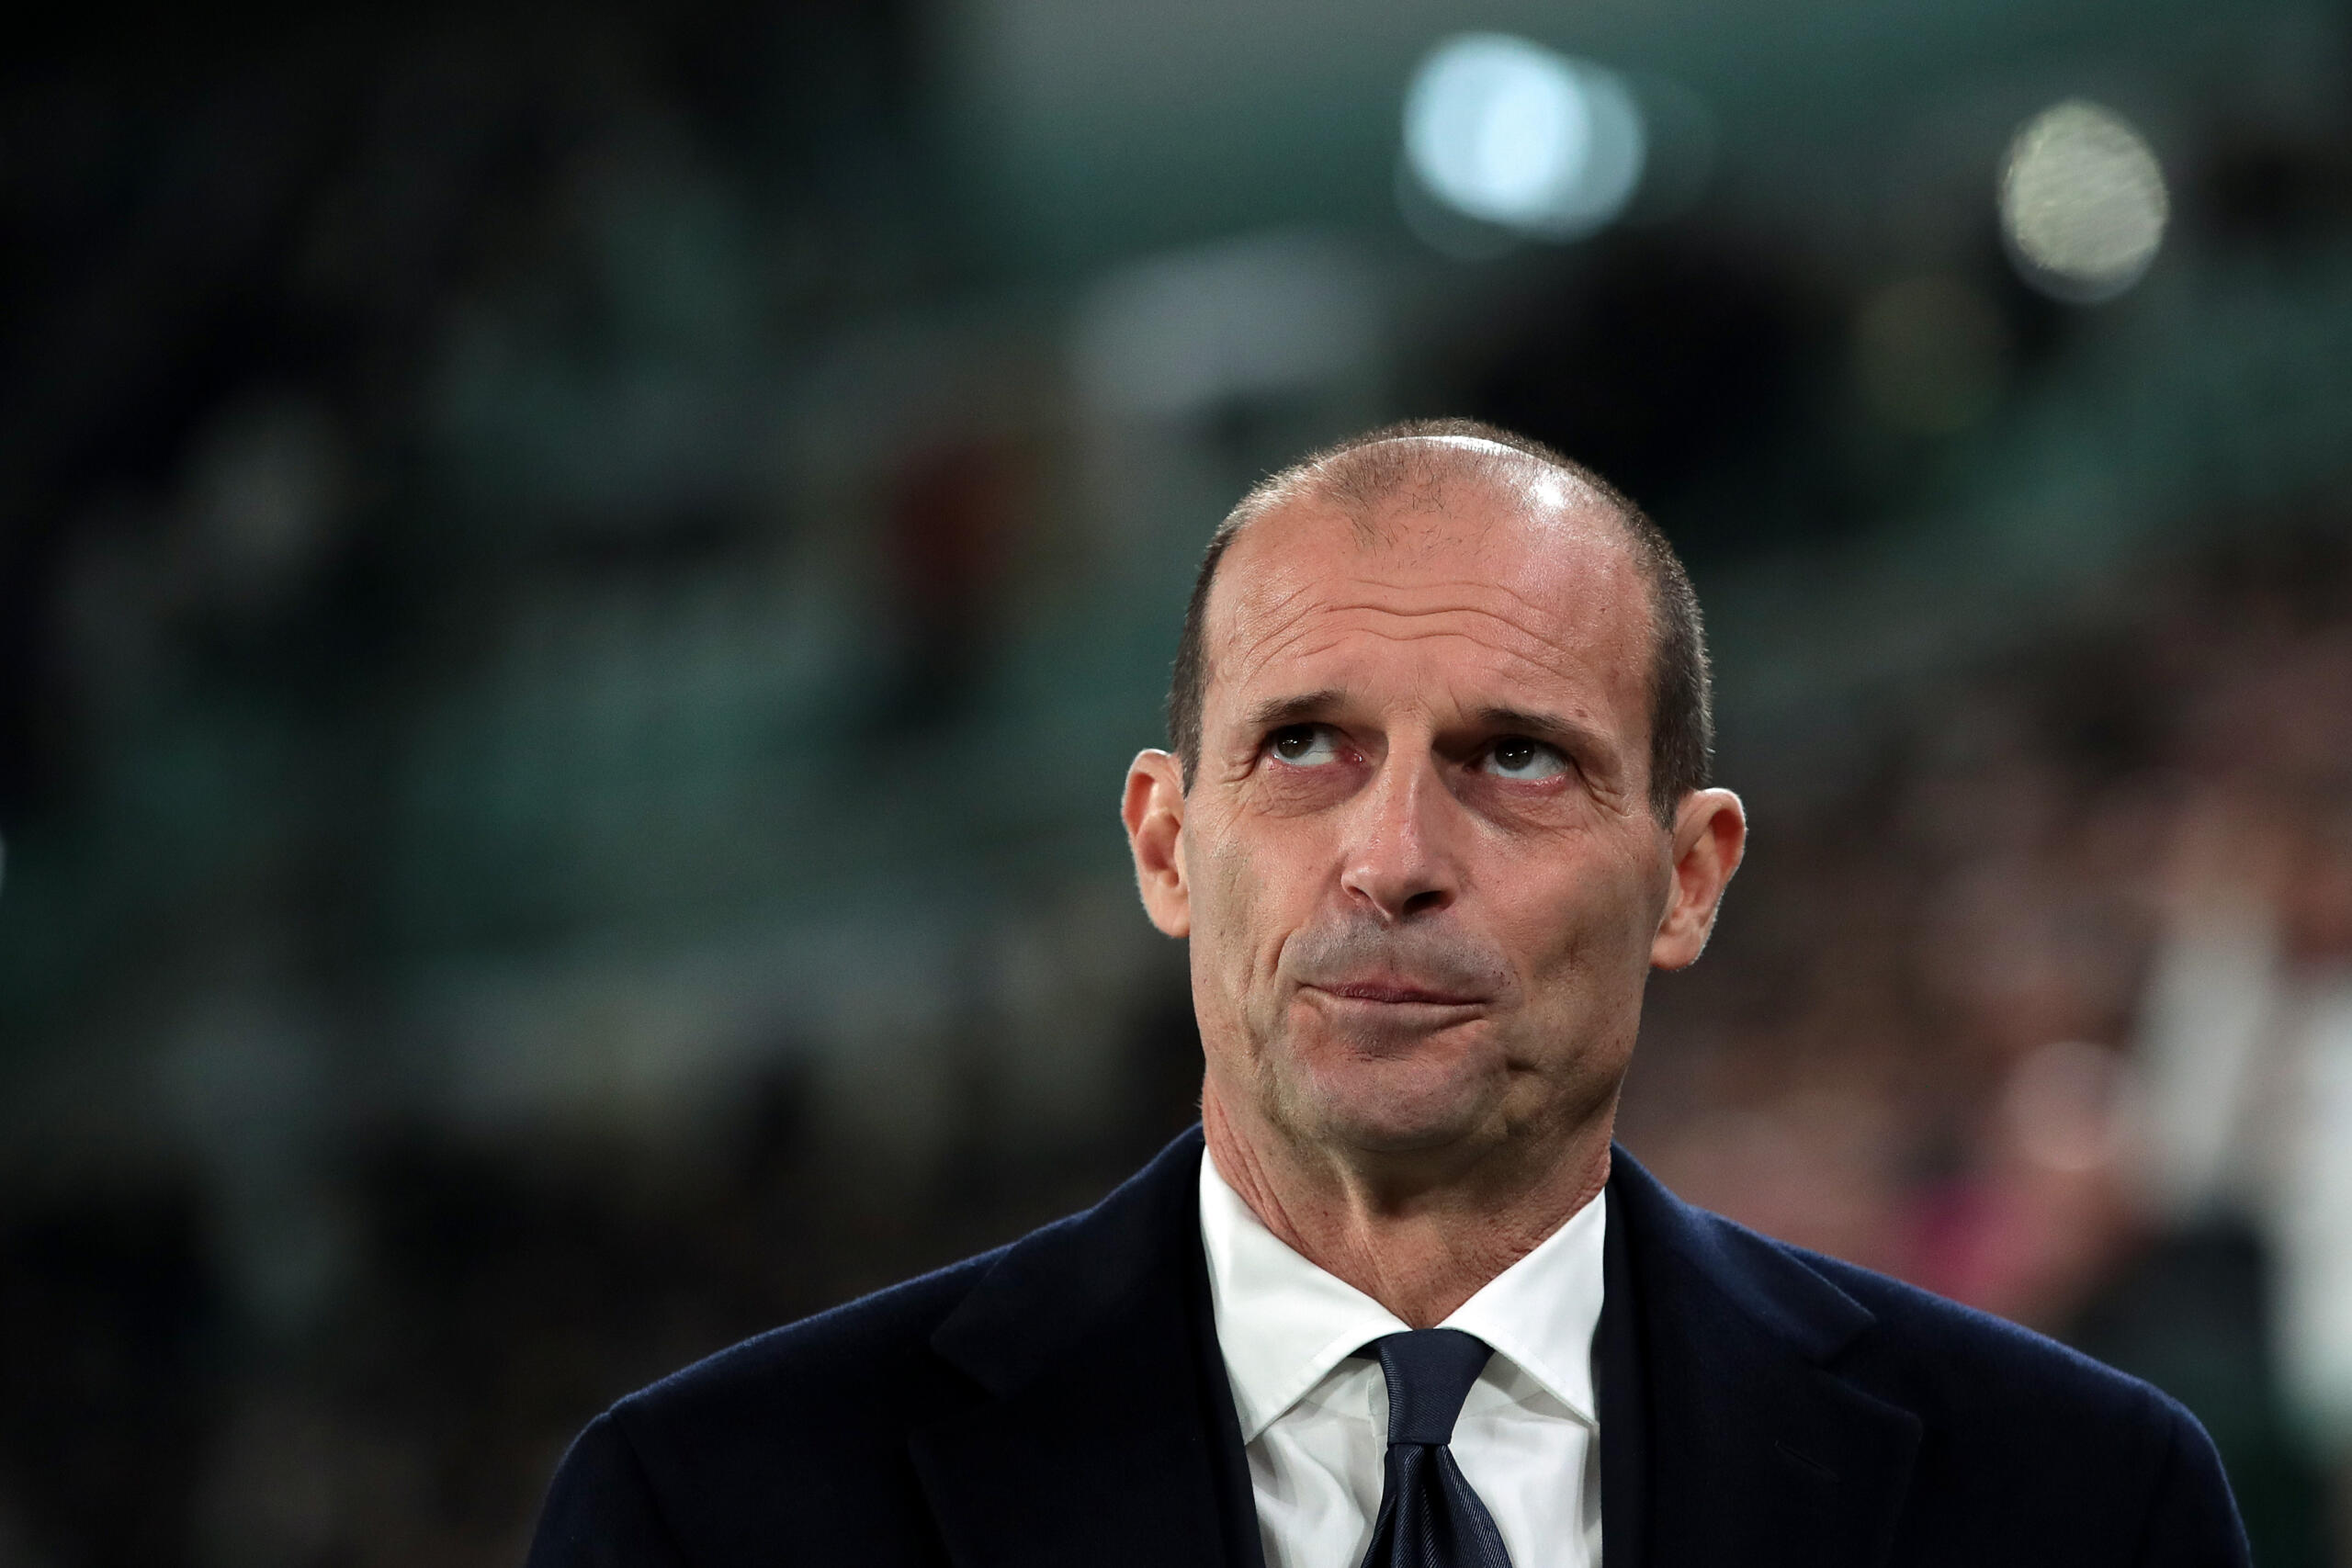 Unlike in previous seasons, Juventus coach Massimiliano Allegri has been very reluctant to move away from his trusted 3-5-2 scheme so far.